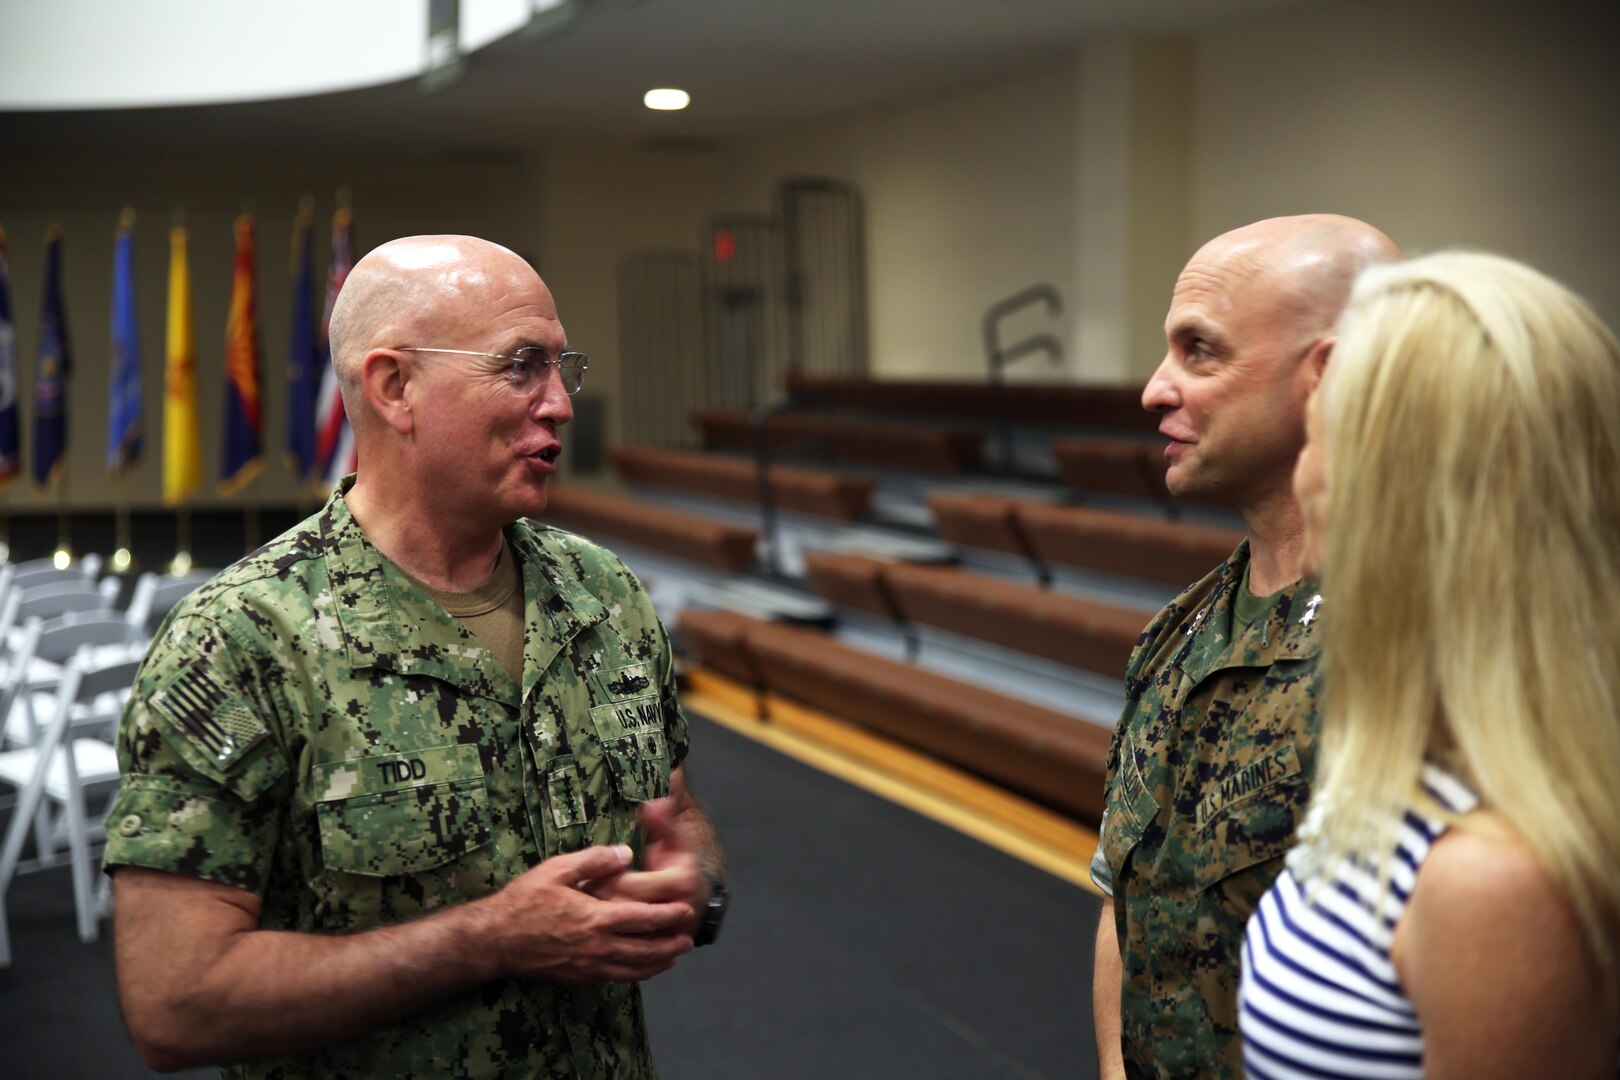 U.S. Navy Adm. Kurt W. Tidd, the commander of U.S. Southern Command, speaks to Maj. Gen. David G. Bellon, the new commander of U.S. Marine Corps Forces, South, and his wife following the unit's change of command ceremony in Doral, Florida, May 22, 2017. Brig. Gen. Kevin M. Iiams relinquished command of MARFORSOUTH to Bellon after serving as the commander since January 2016. (U.S. Marine Corps photo by Gunnery Sgt. Zachary Dyer)